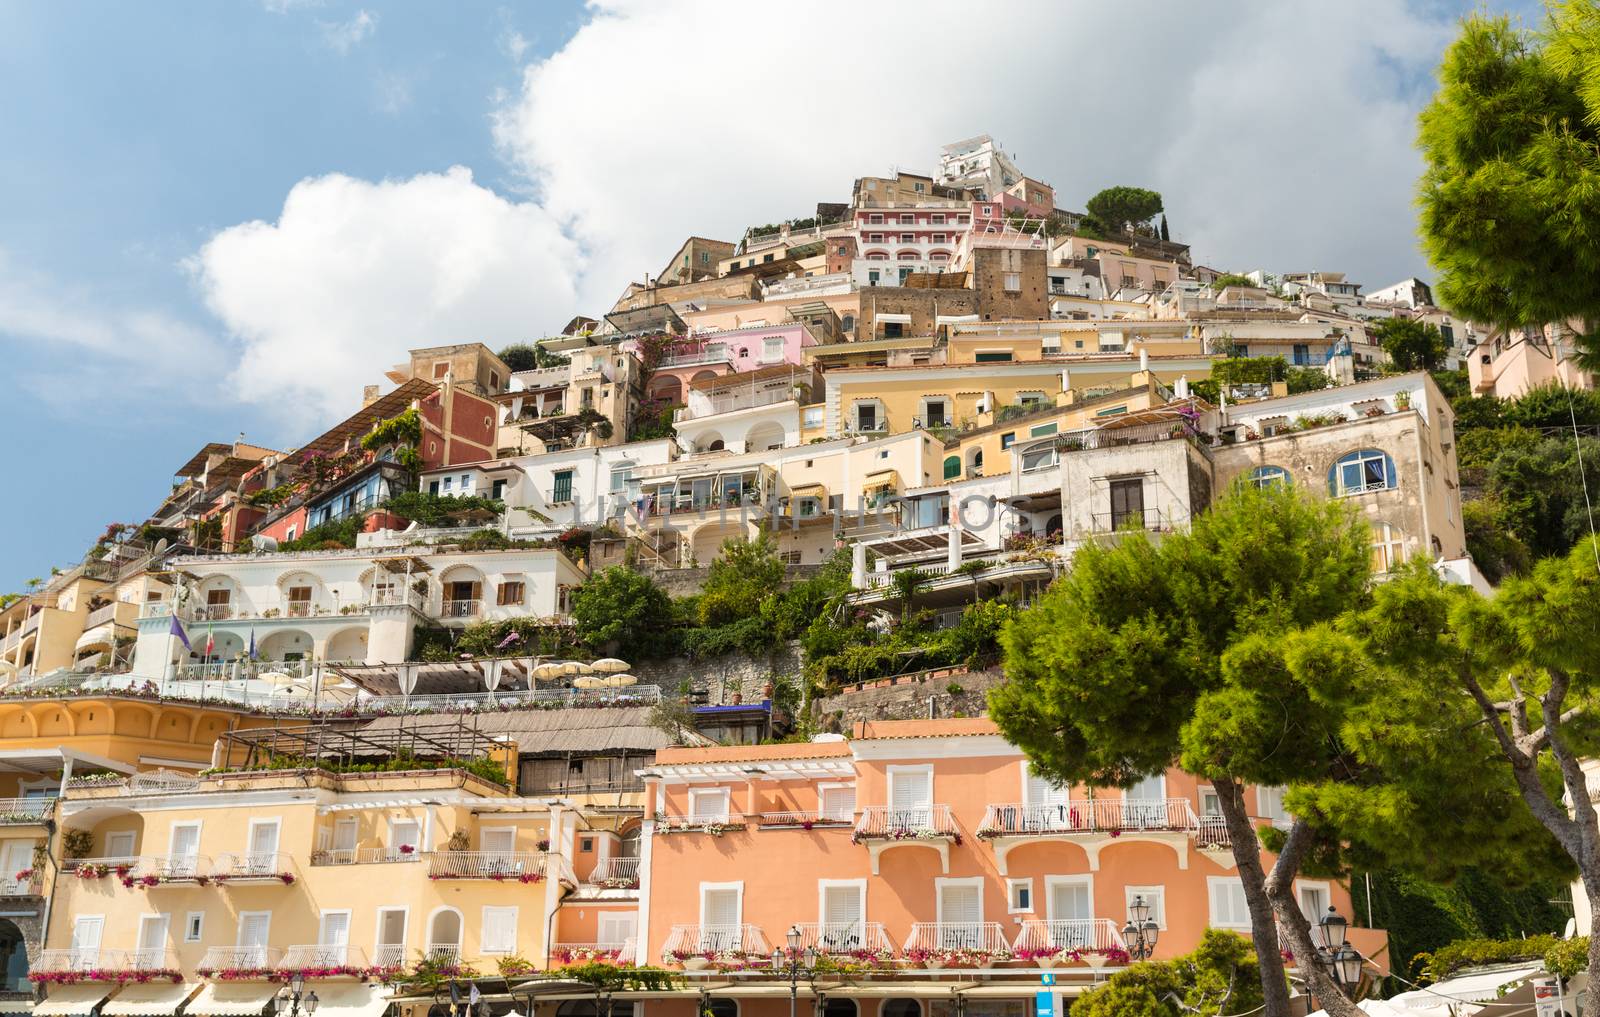 A view looking back up from the front at Positano